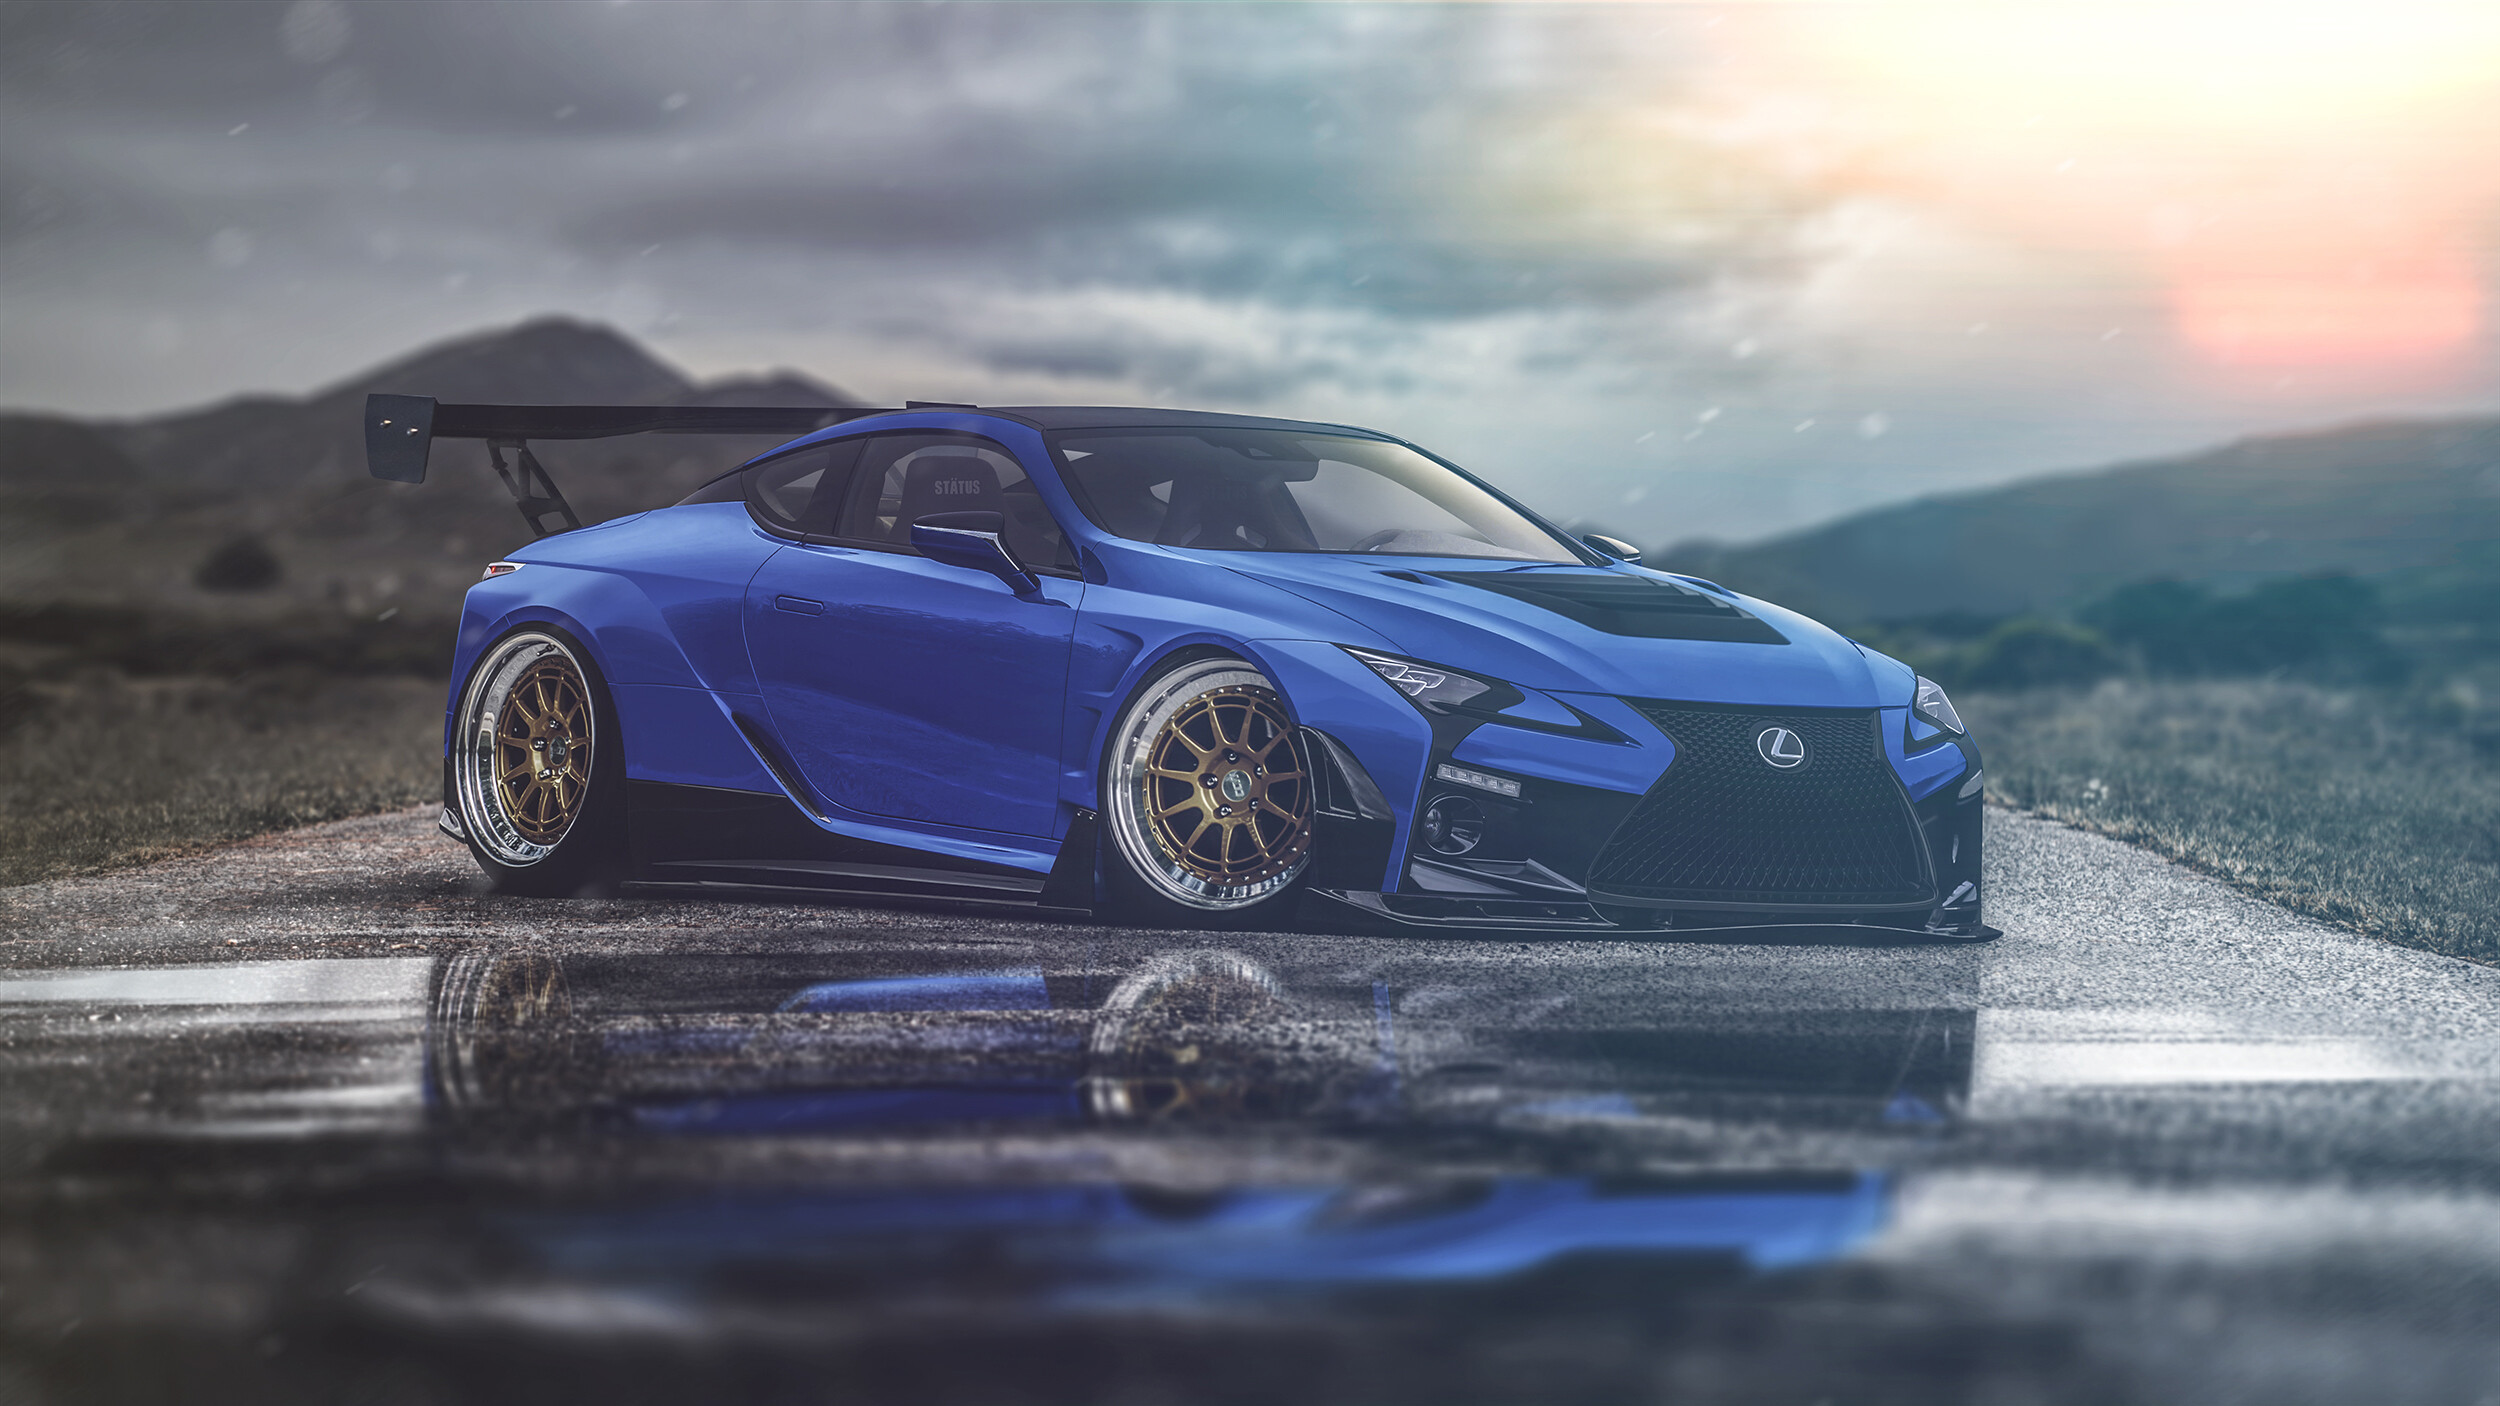 Lexus: A sports car that is powered by a naturally aspirated V8 5.0-liter engine, Delivers 470 horsepower, LC 500. 2500x1410 HD Wallpaper.